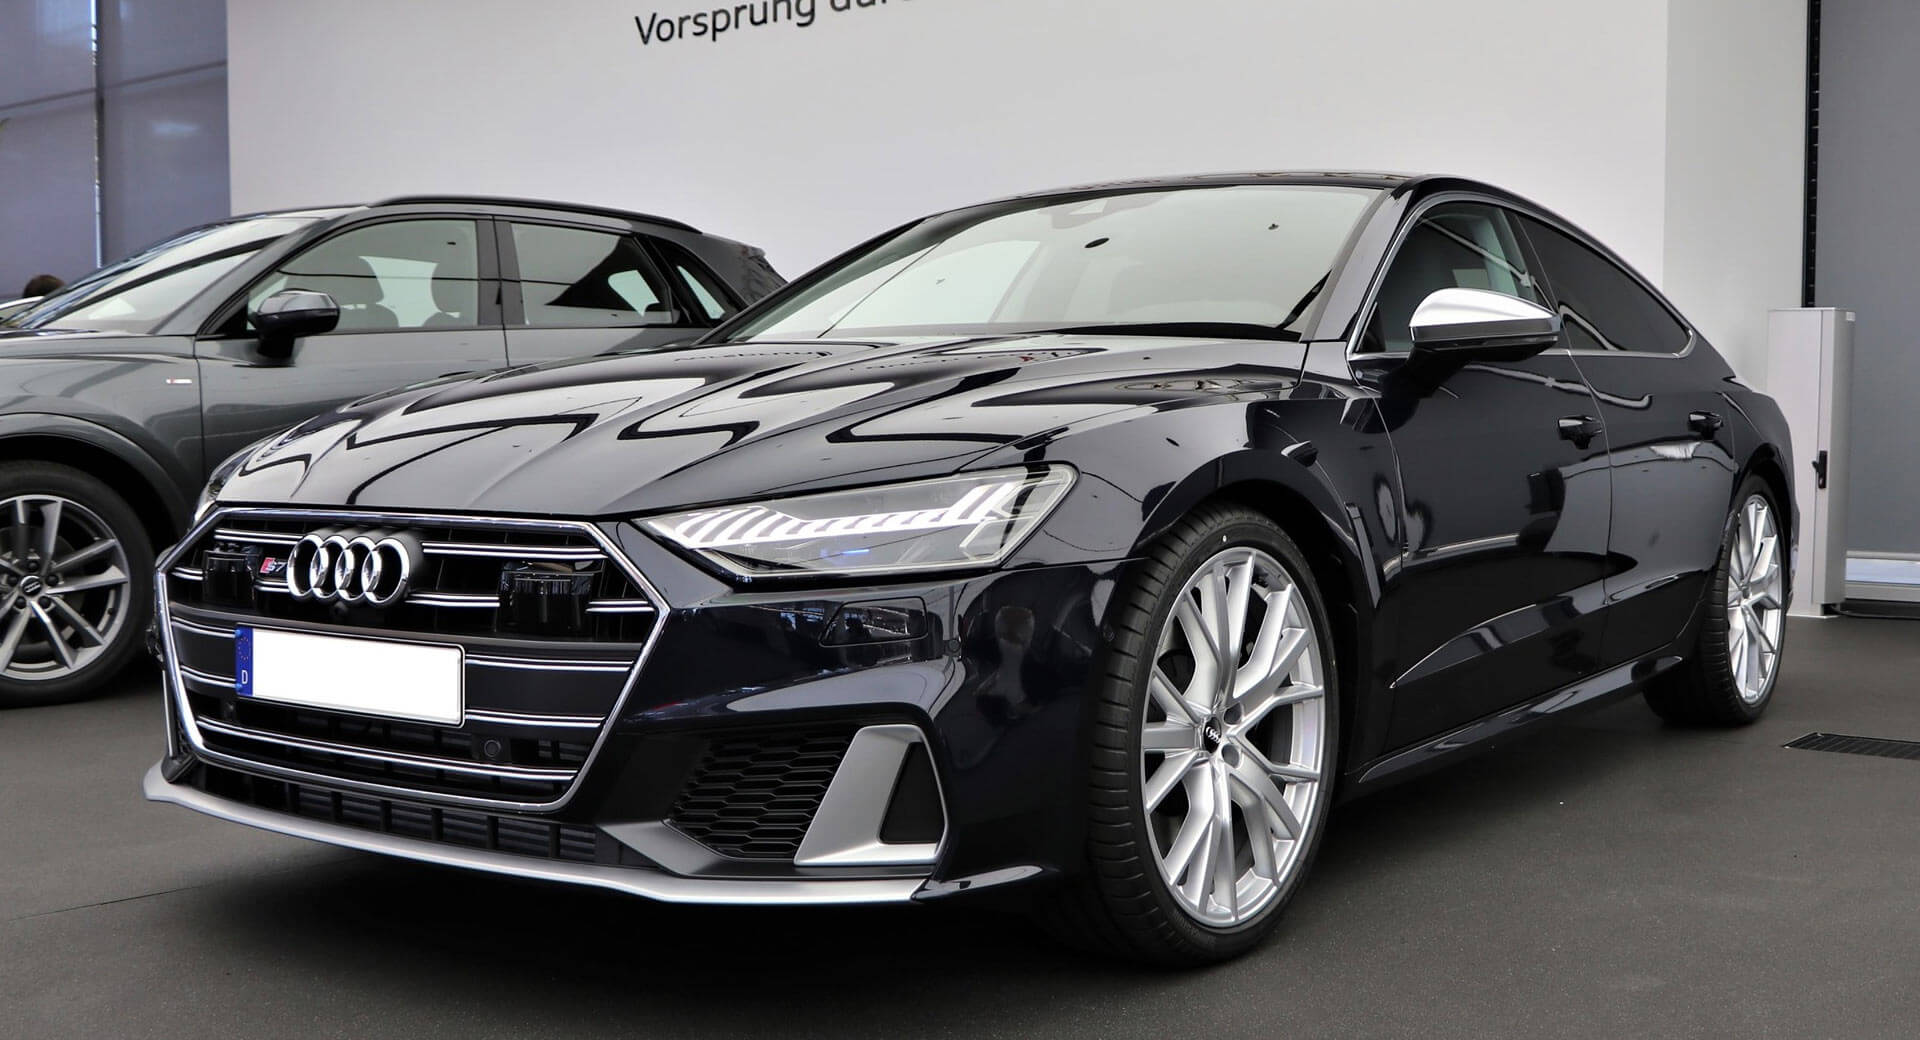 2020 Audi S7 On Display With Firmament Blue Metallic Exterior | Carscoops